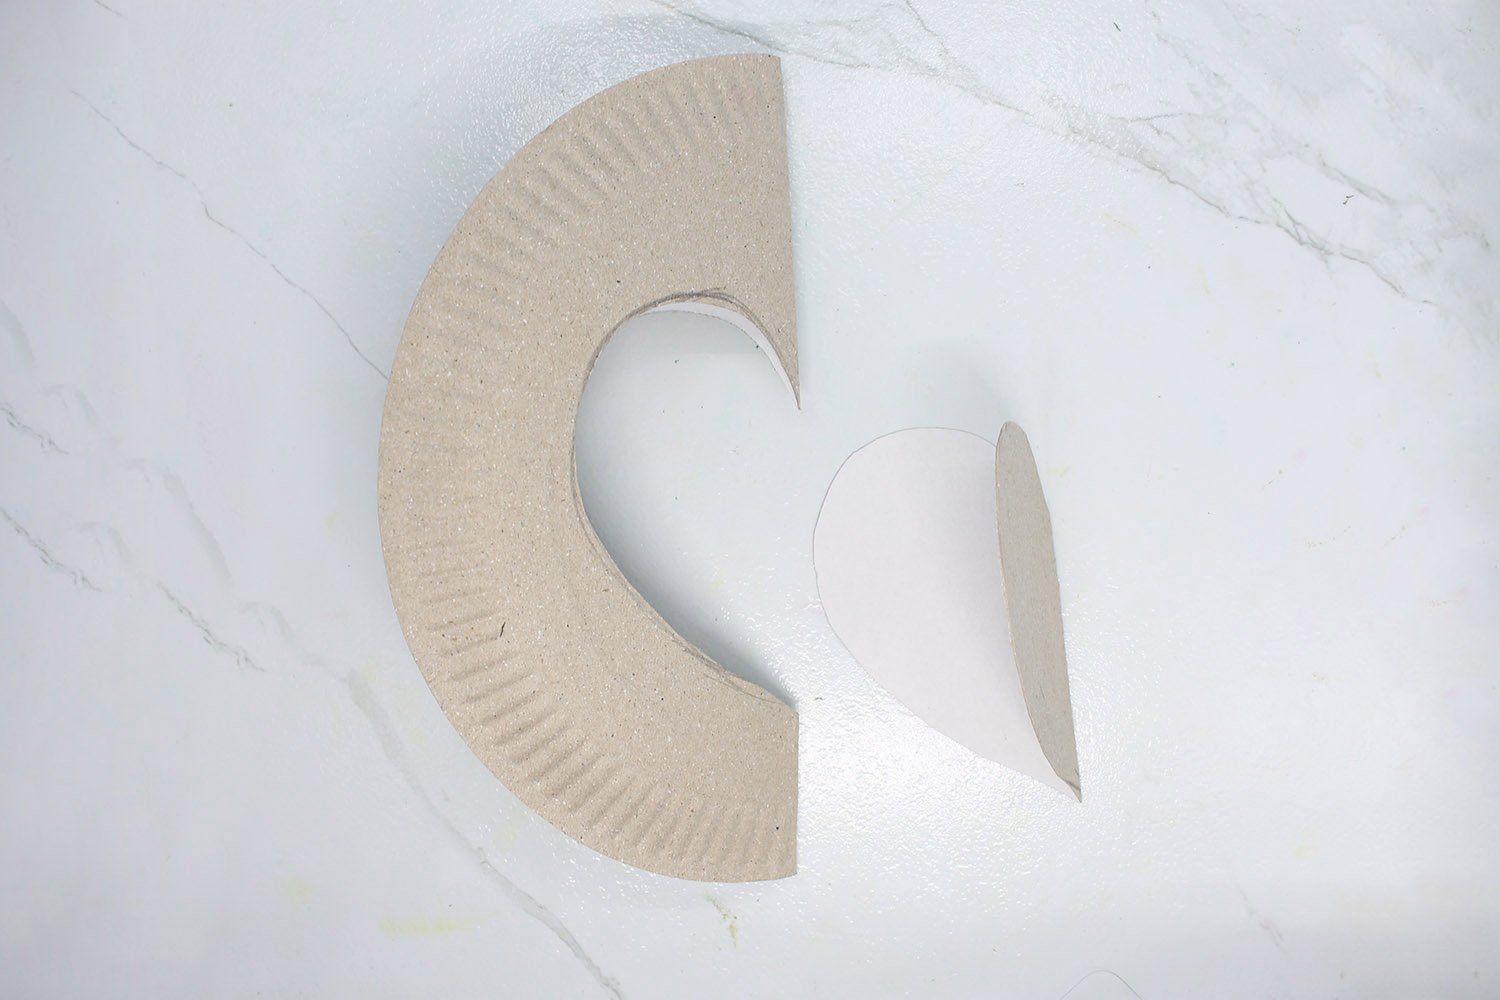 How To Make a Paper Plate Heart - Step 04